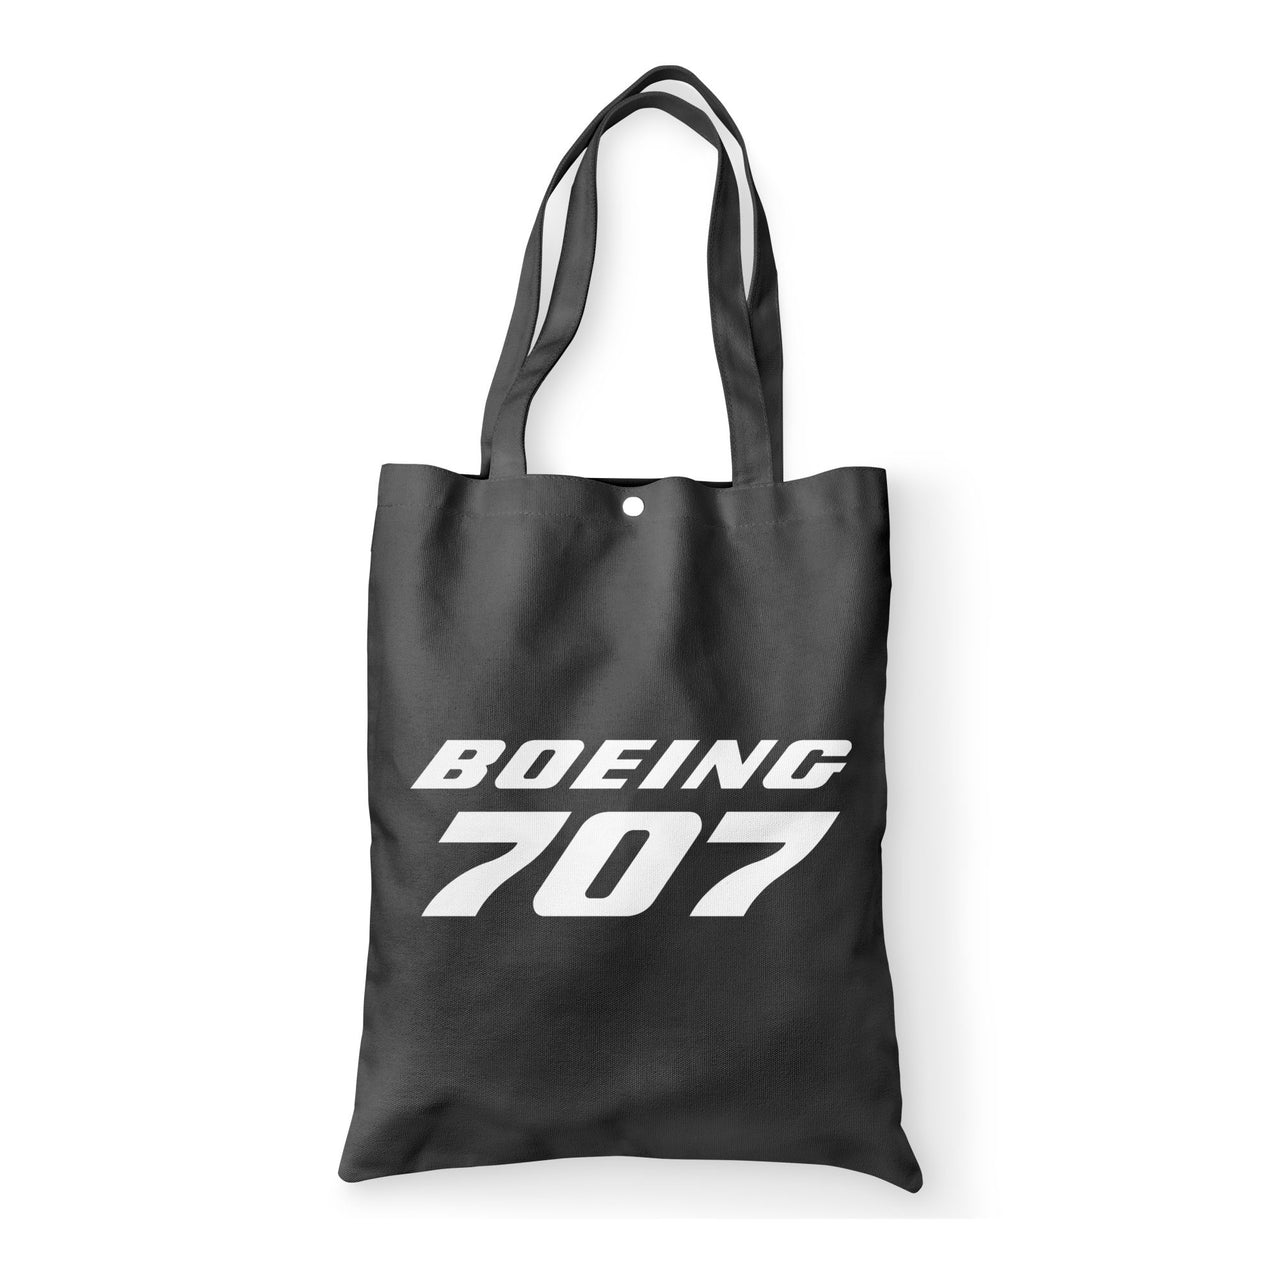 Boeing 707 & Text Designed Tote Bags